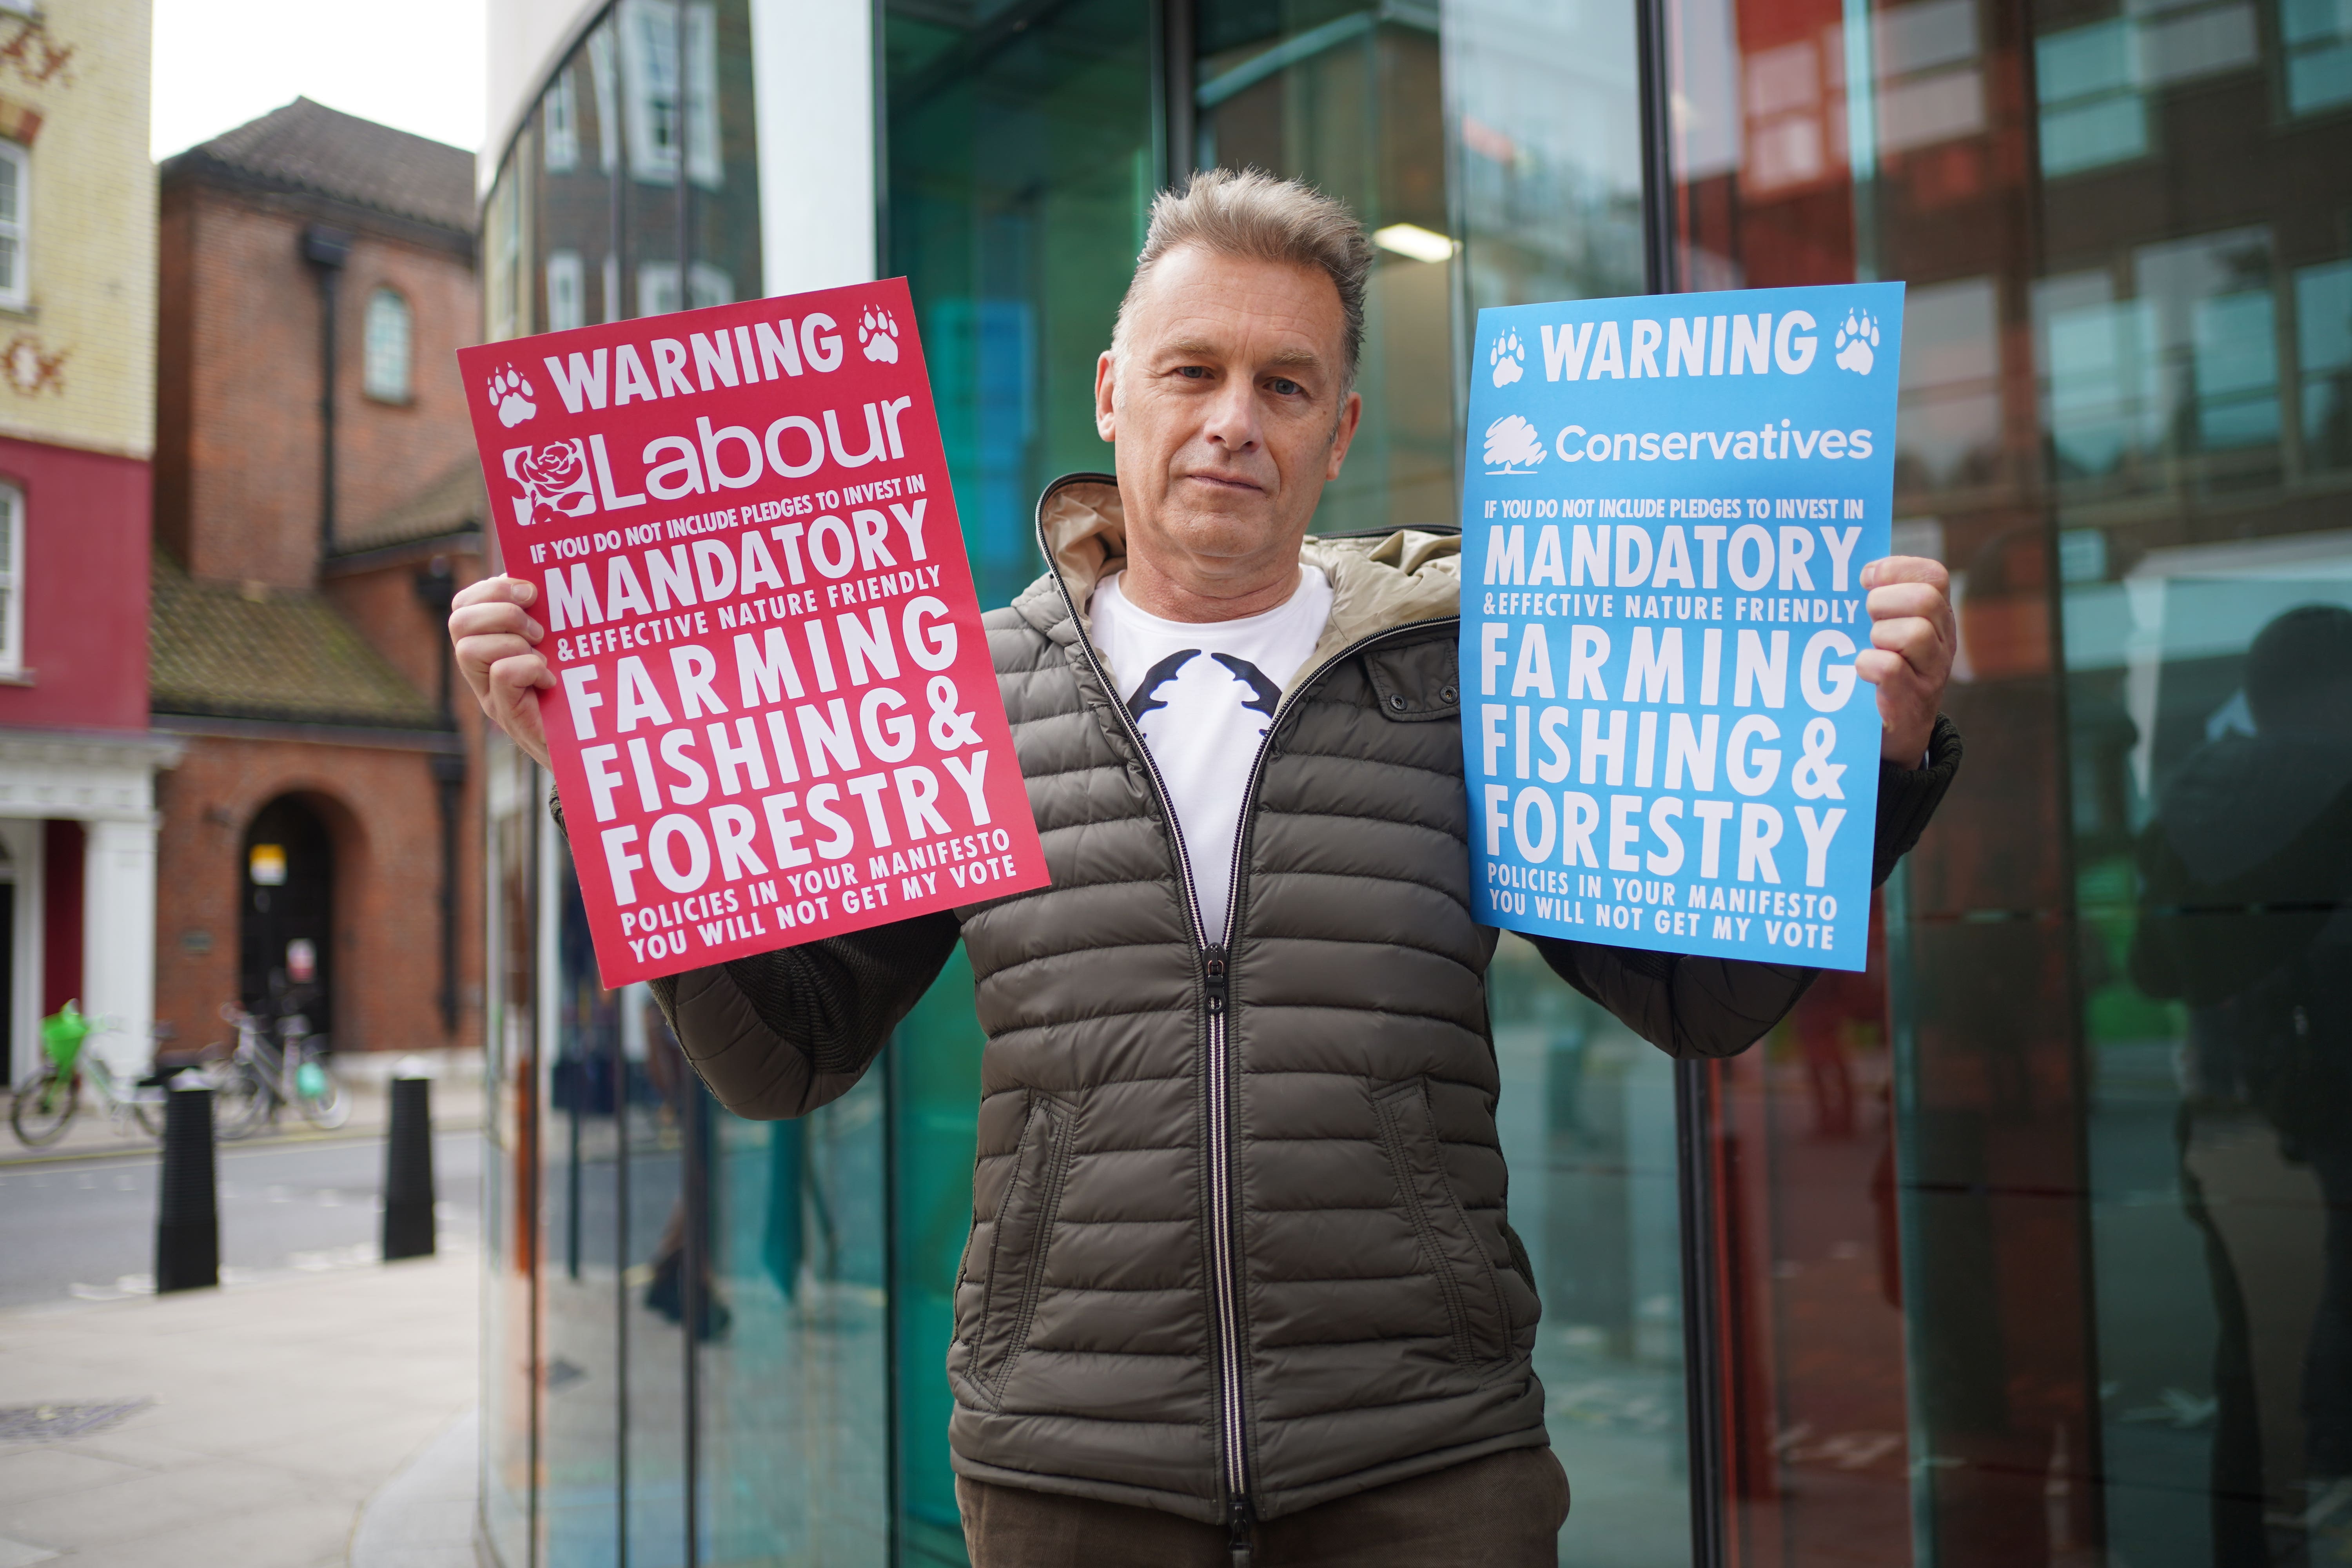 Packham has also campaigned against government budget cuts to agencies tasked with protecting nature